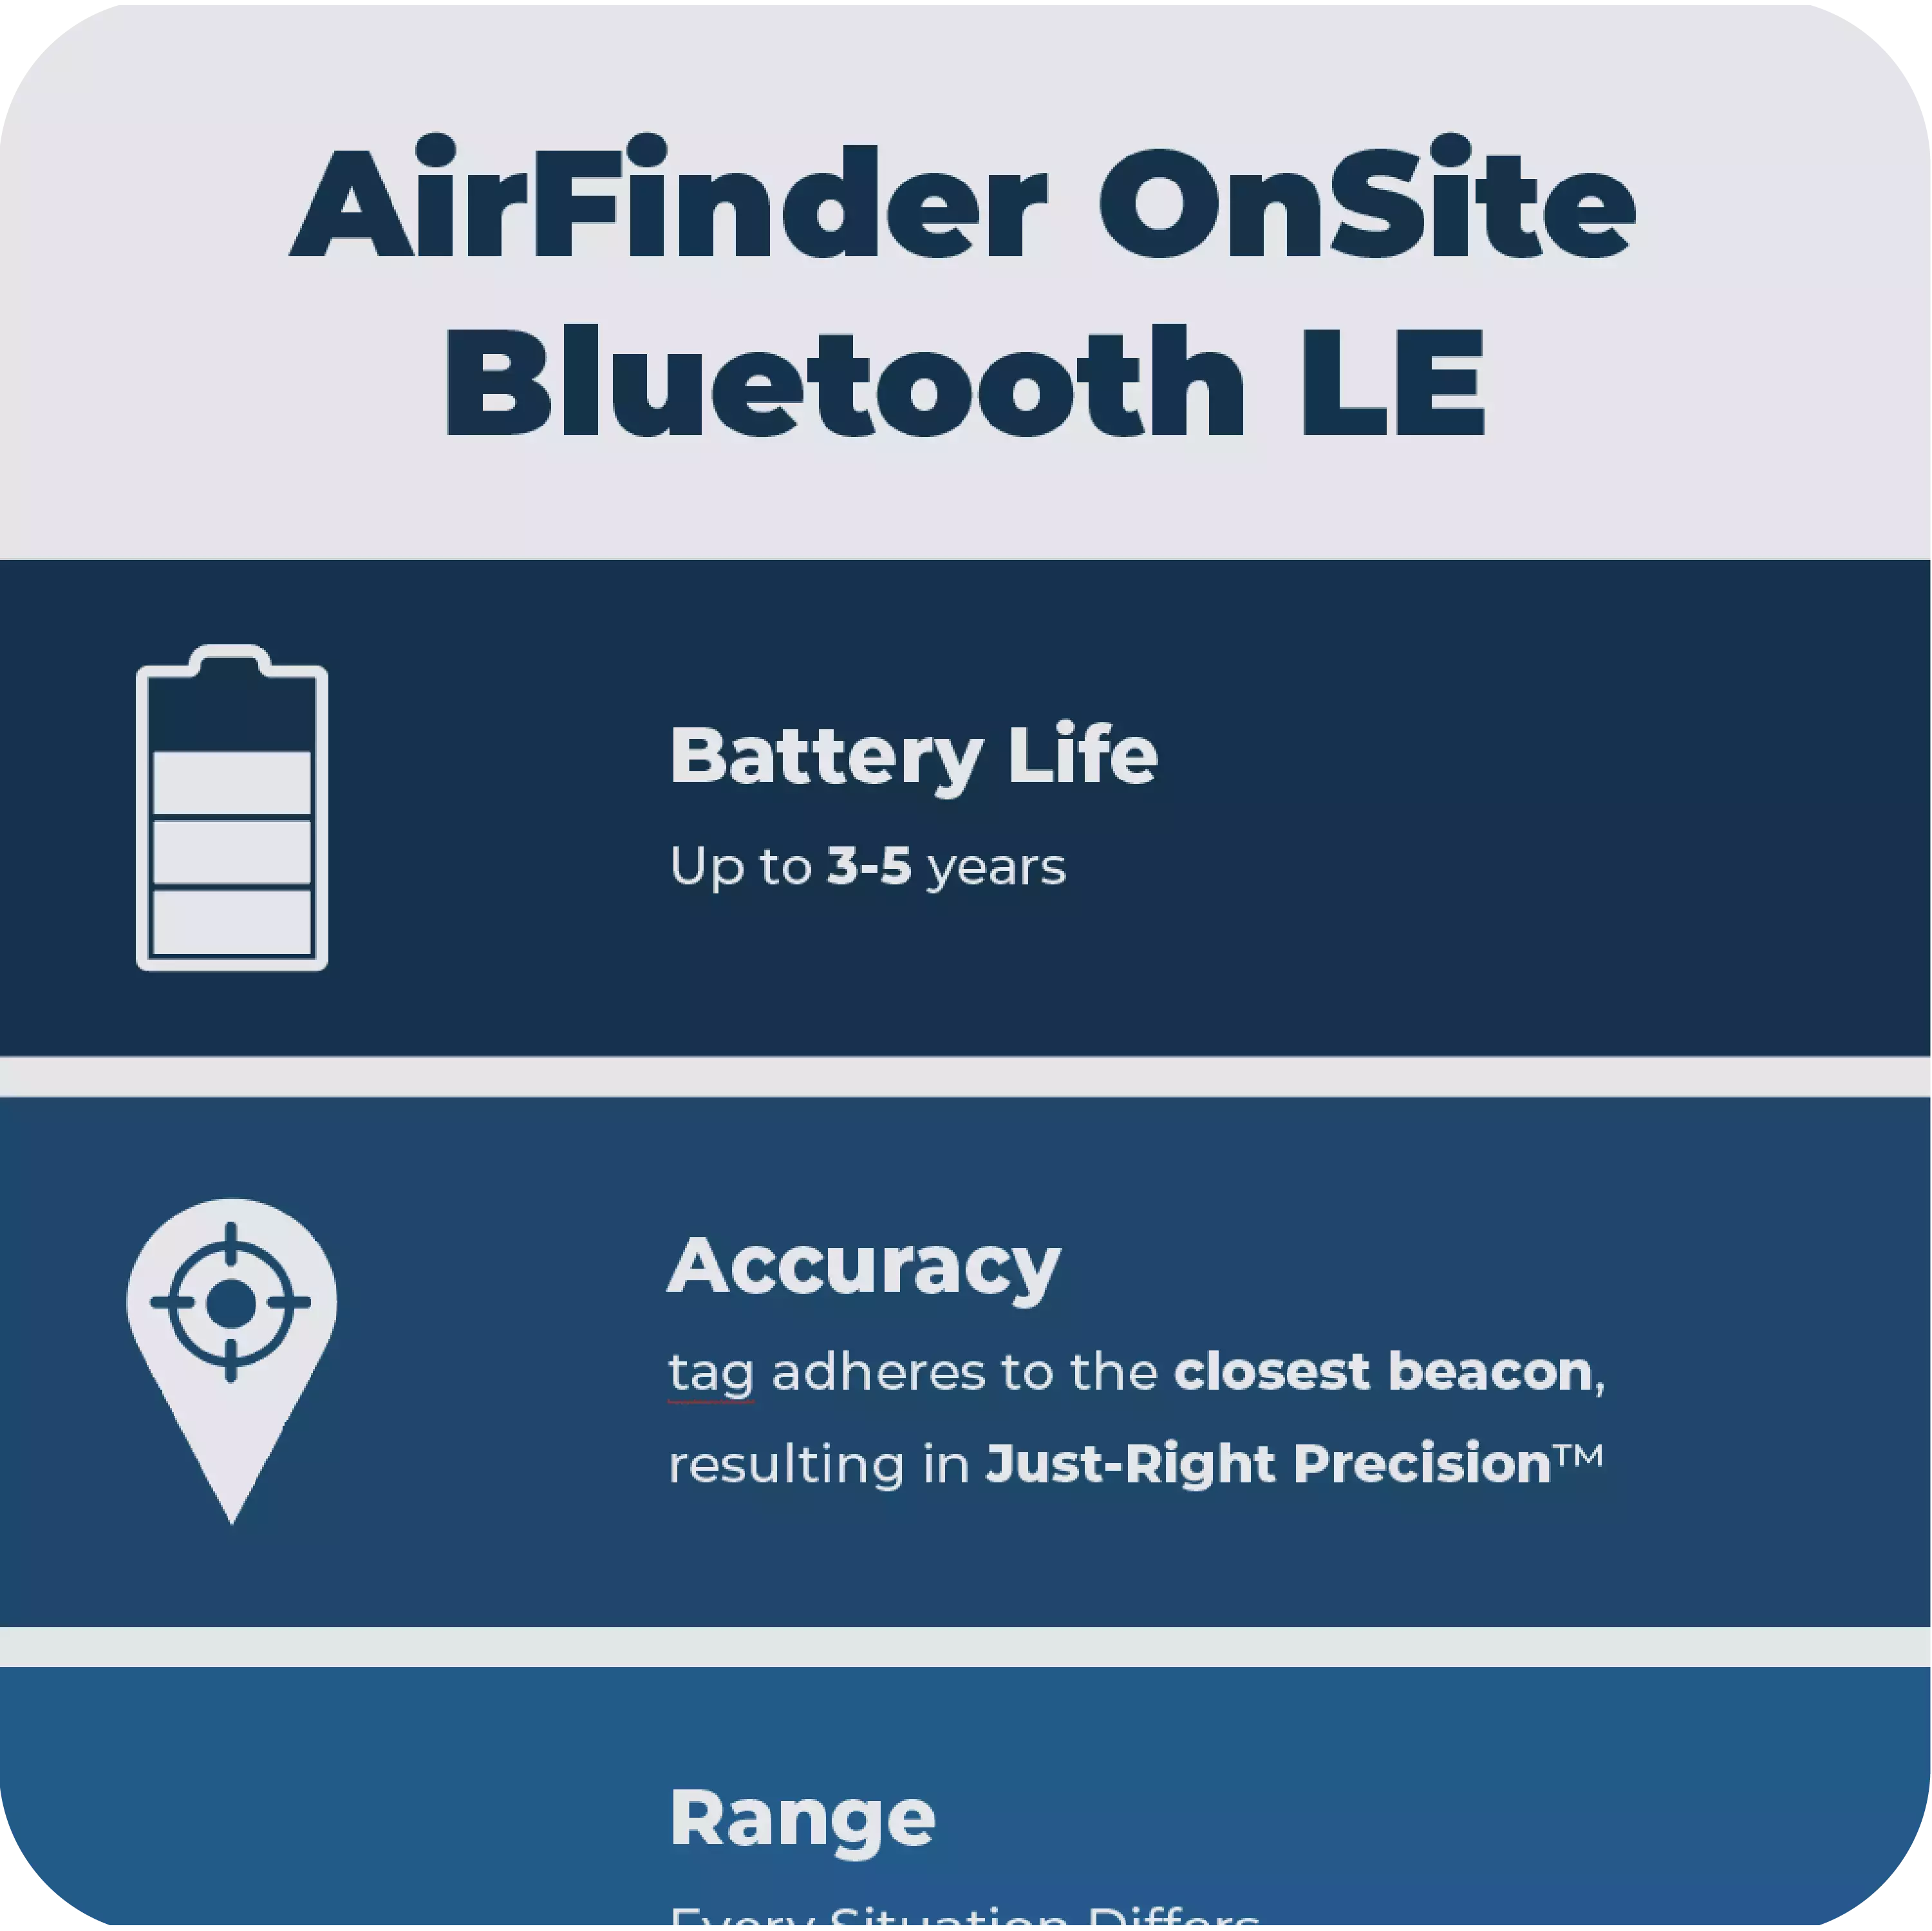 AirFinder OnSite Bluetooth LE_Stats_Handout